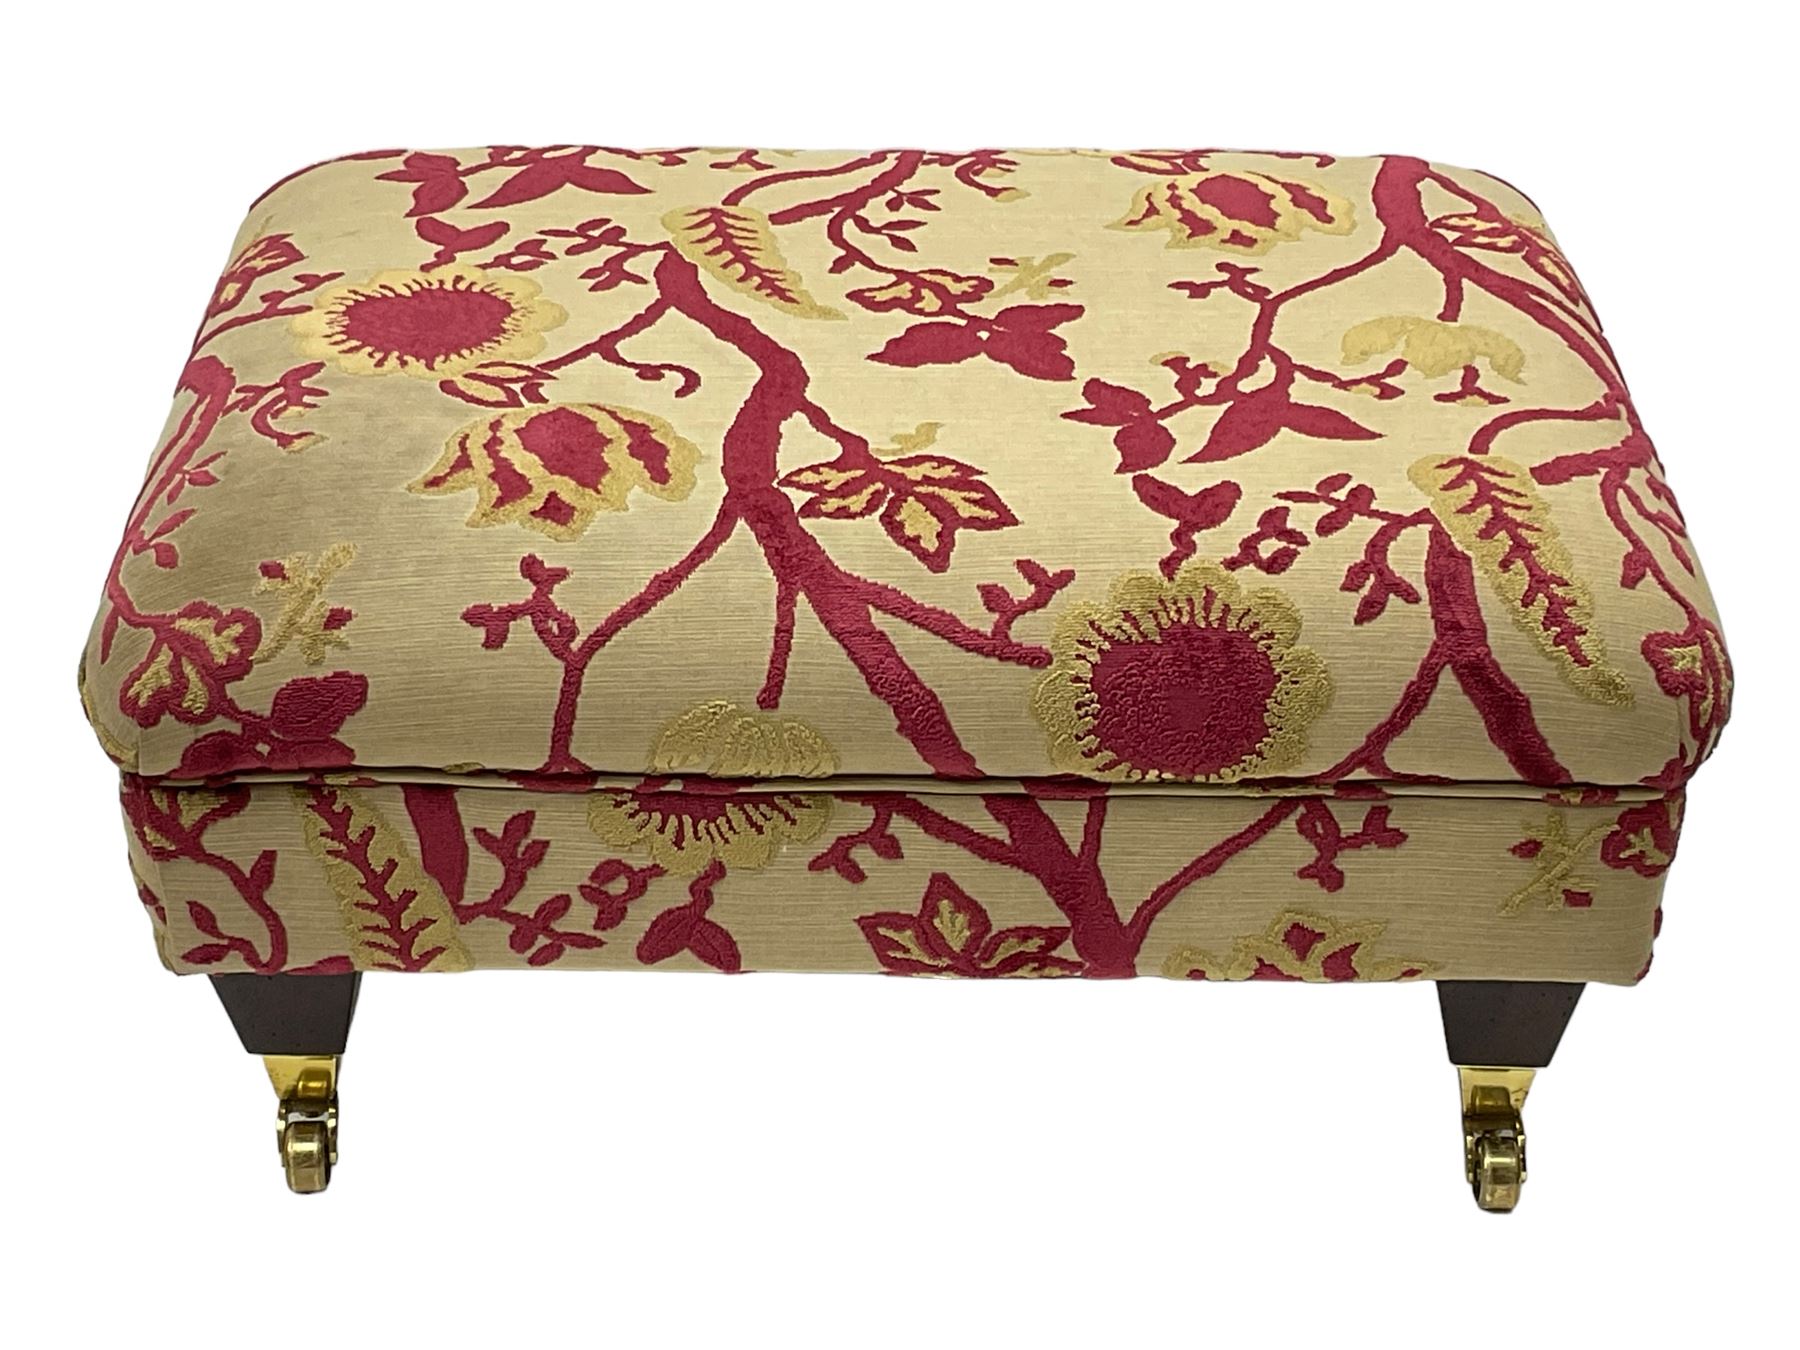 Three-piece lounge suite - large two-seat sofa upholstered in red and gold striped fabric (W185cm - Image 11 of 24